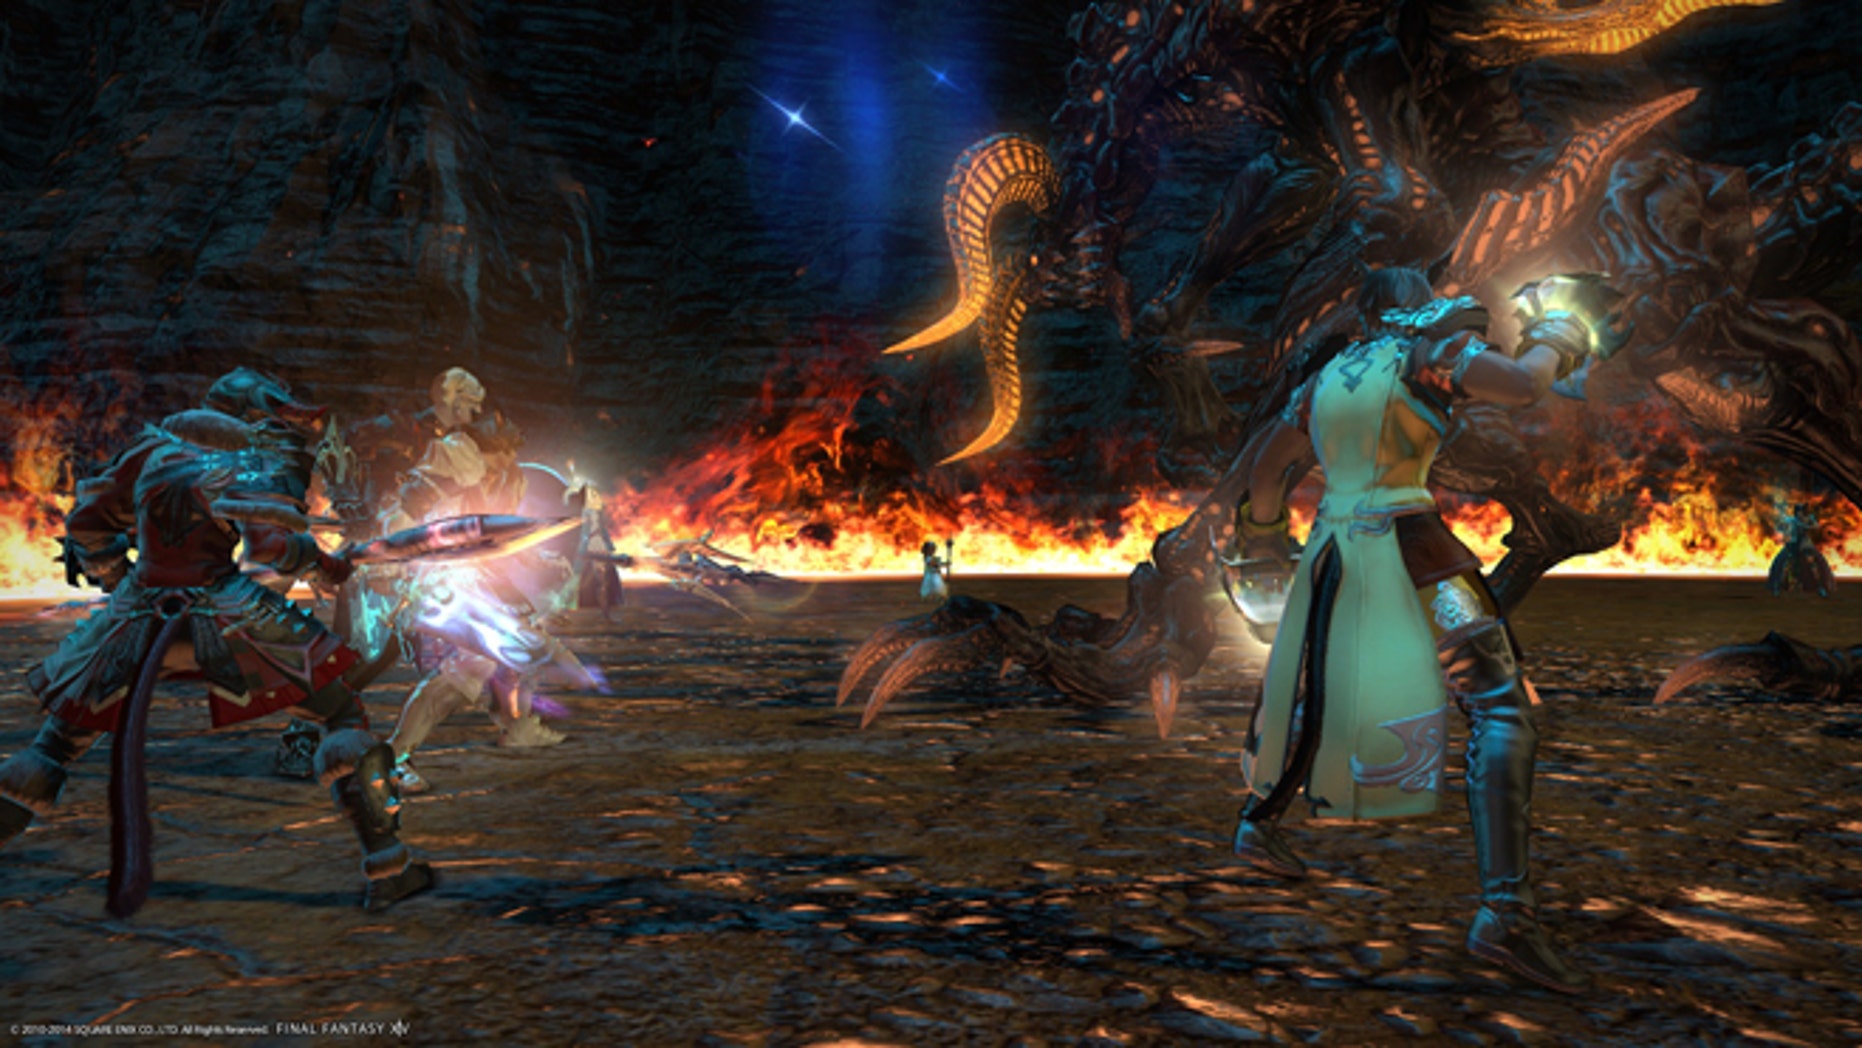 Final Fantasy Xiv A Realm Reborn Review Biggest Turnaround In Video Game History Fox News